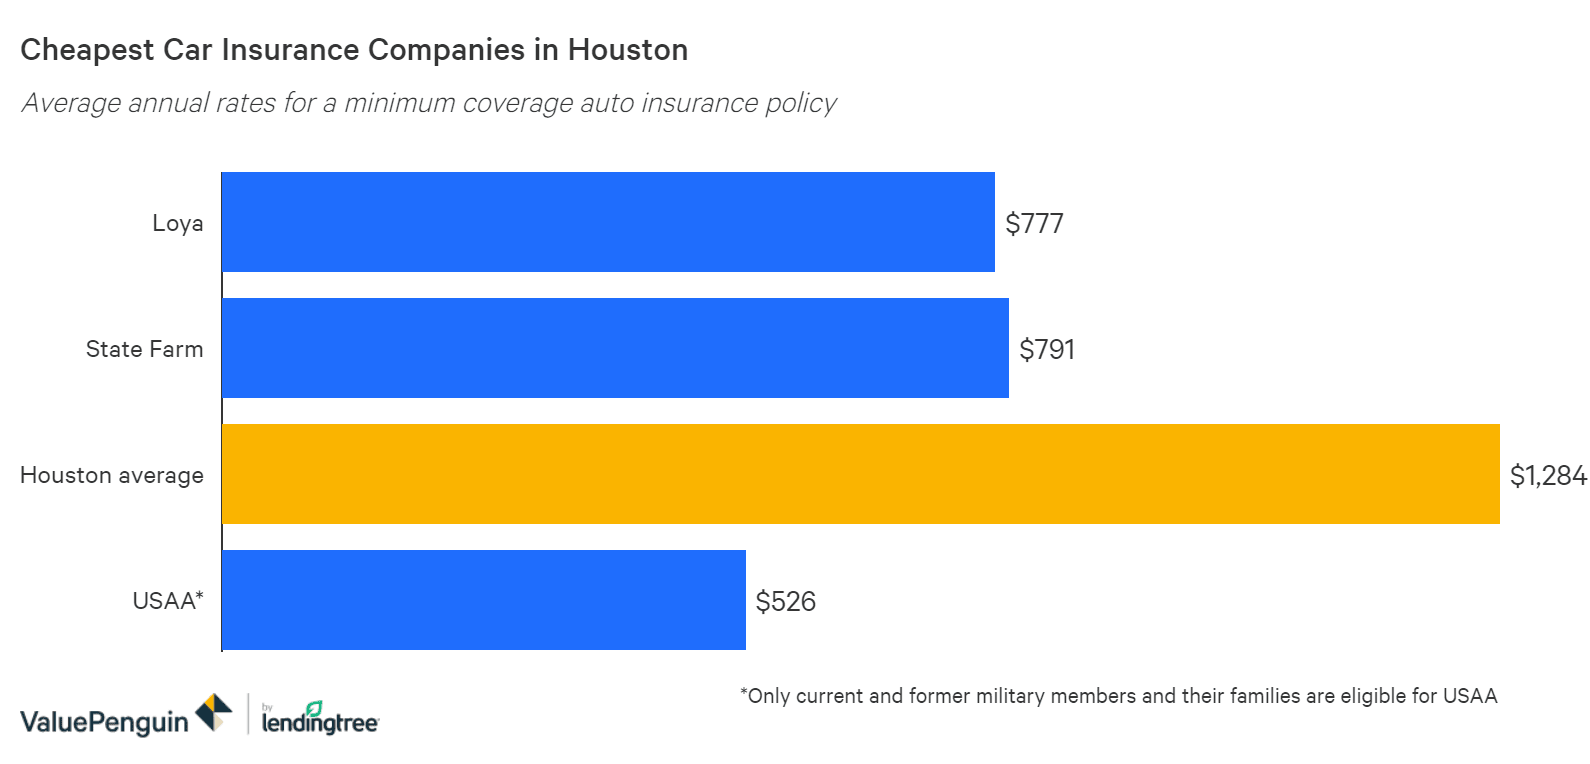 The graph shows which companies are the cheapest for car insurance in Houston TX